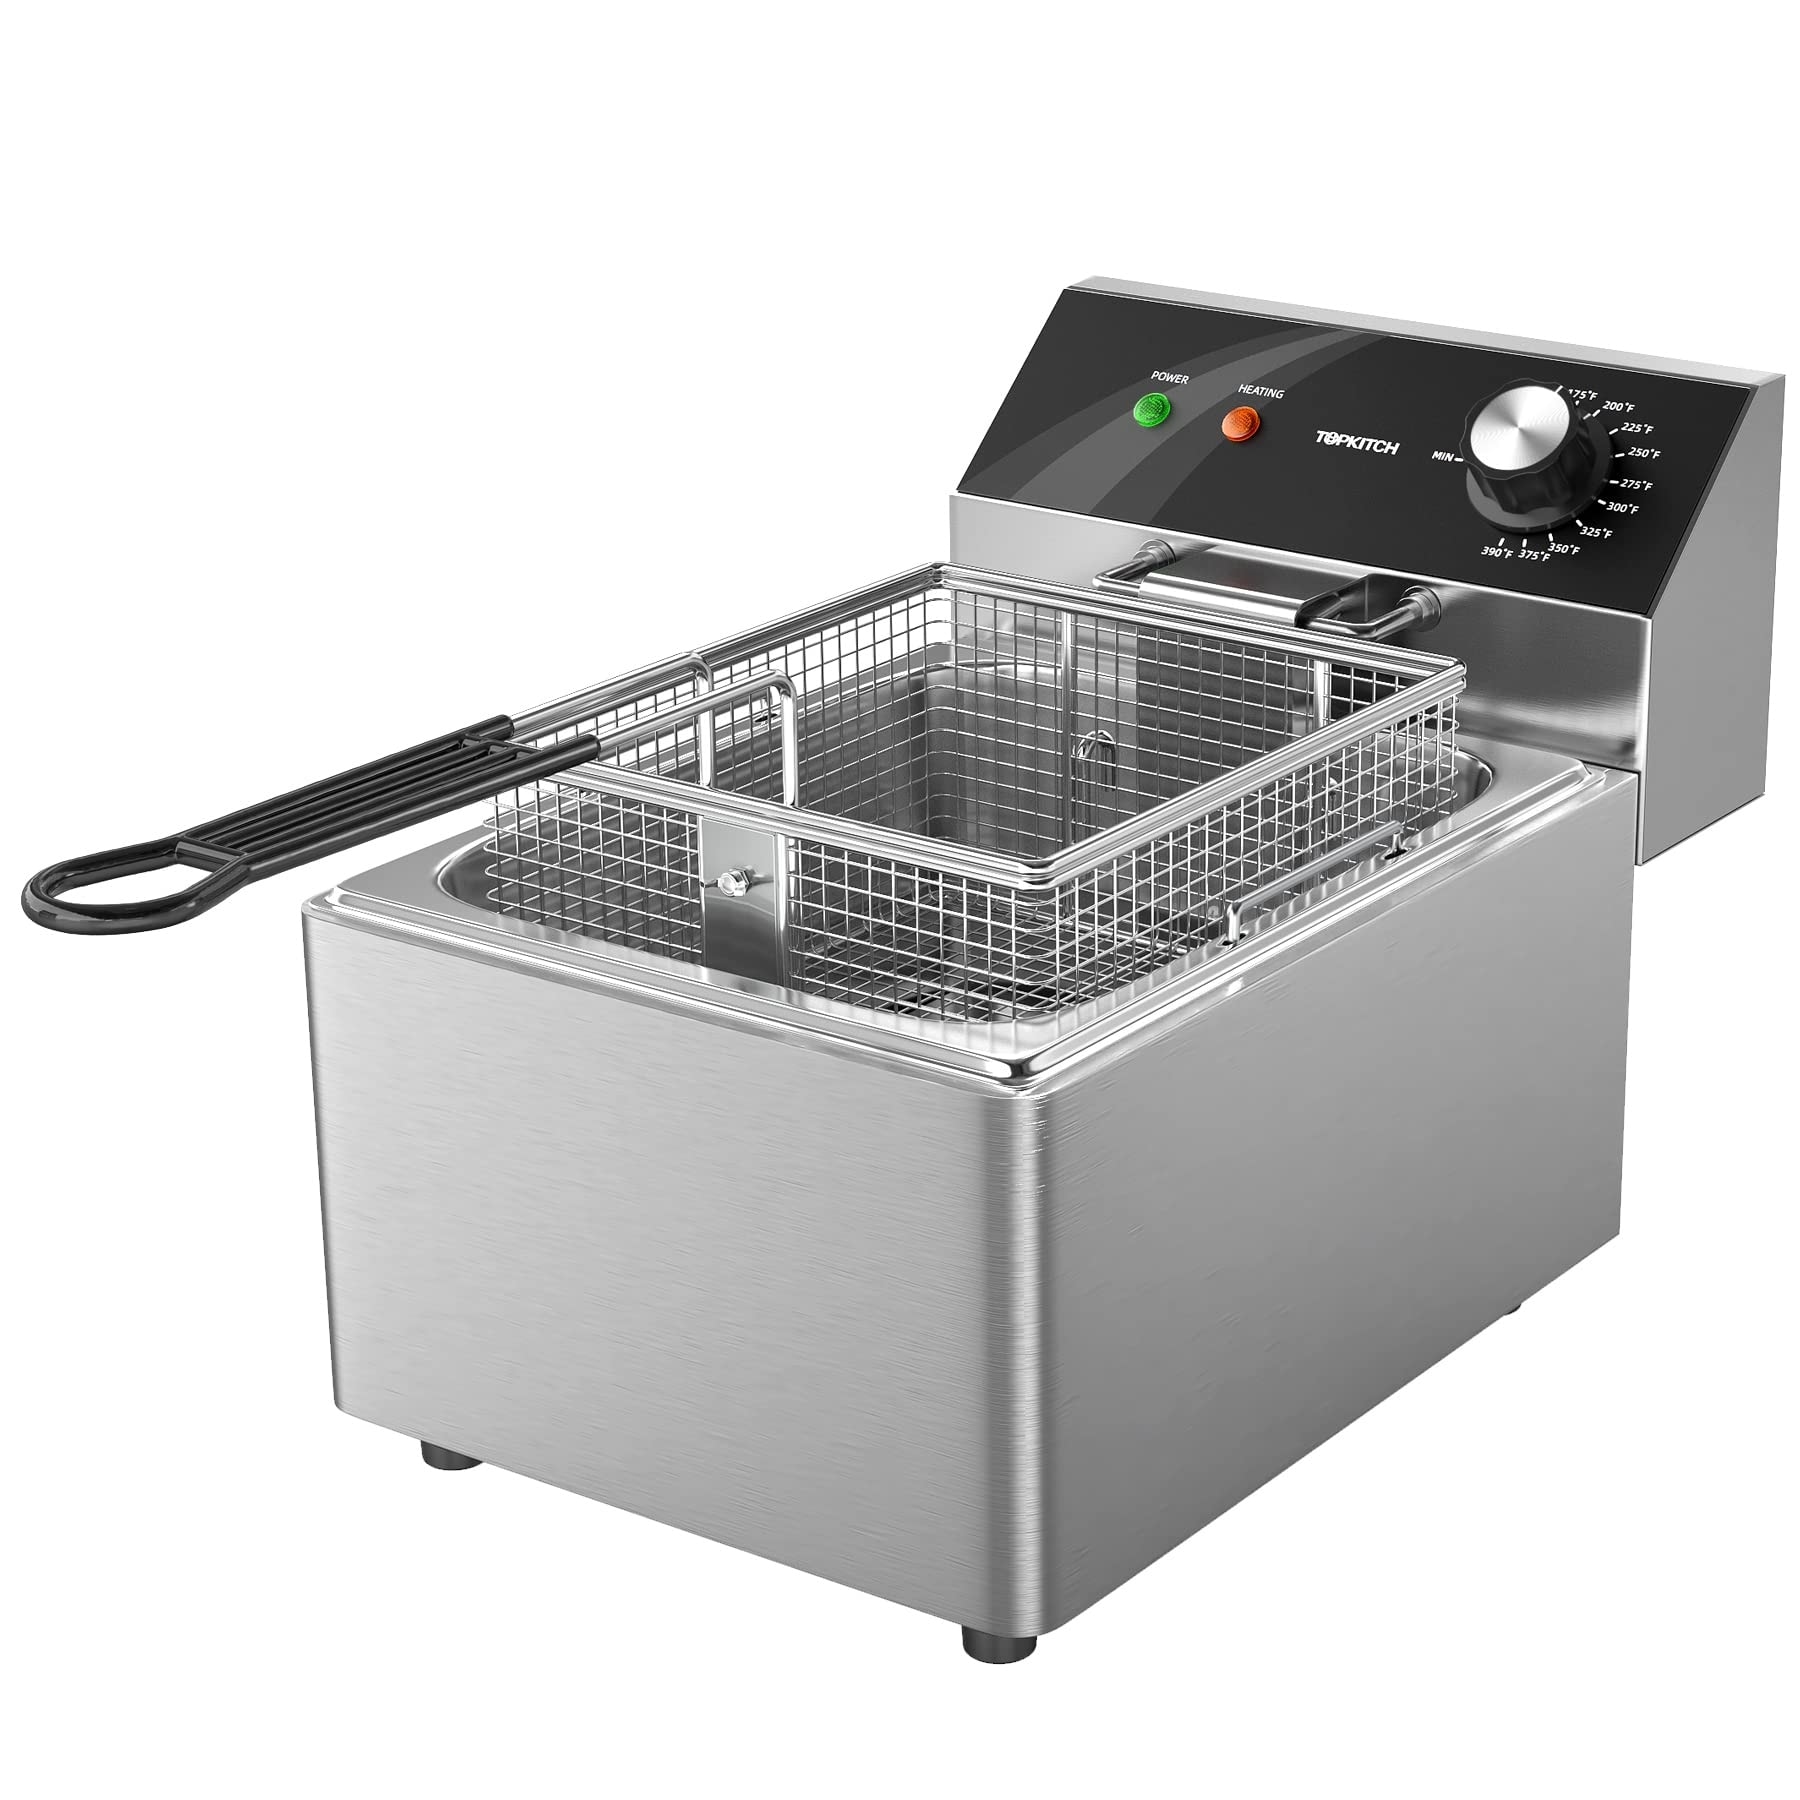 https://ak1.ostkcdn.com/images/products/is/images/direct/d971d862422ff91bd7bd3f5e11a3329225b61034/Electric-Deep-Fryer-Countertop-Deep-Fryer-with-Basket-and-Lid-Capacity-10L%2810.5QT%29-Stainless-Steel-Single-Tank-Oil-Fryers.jpg